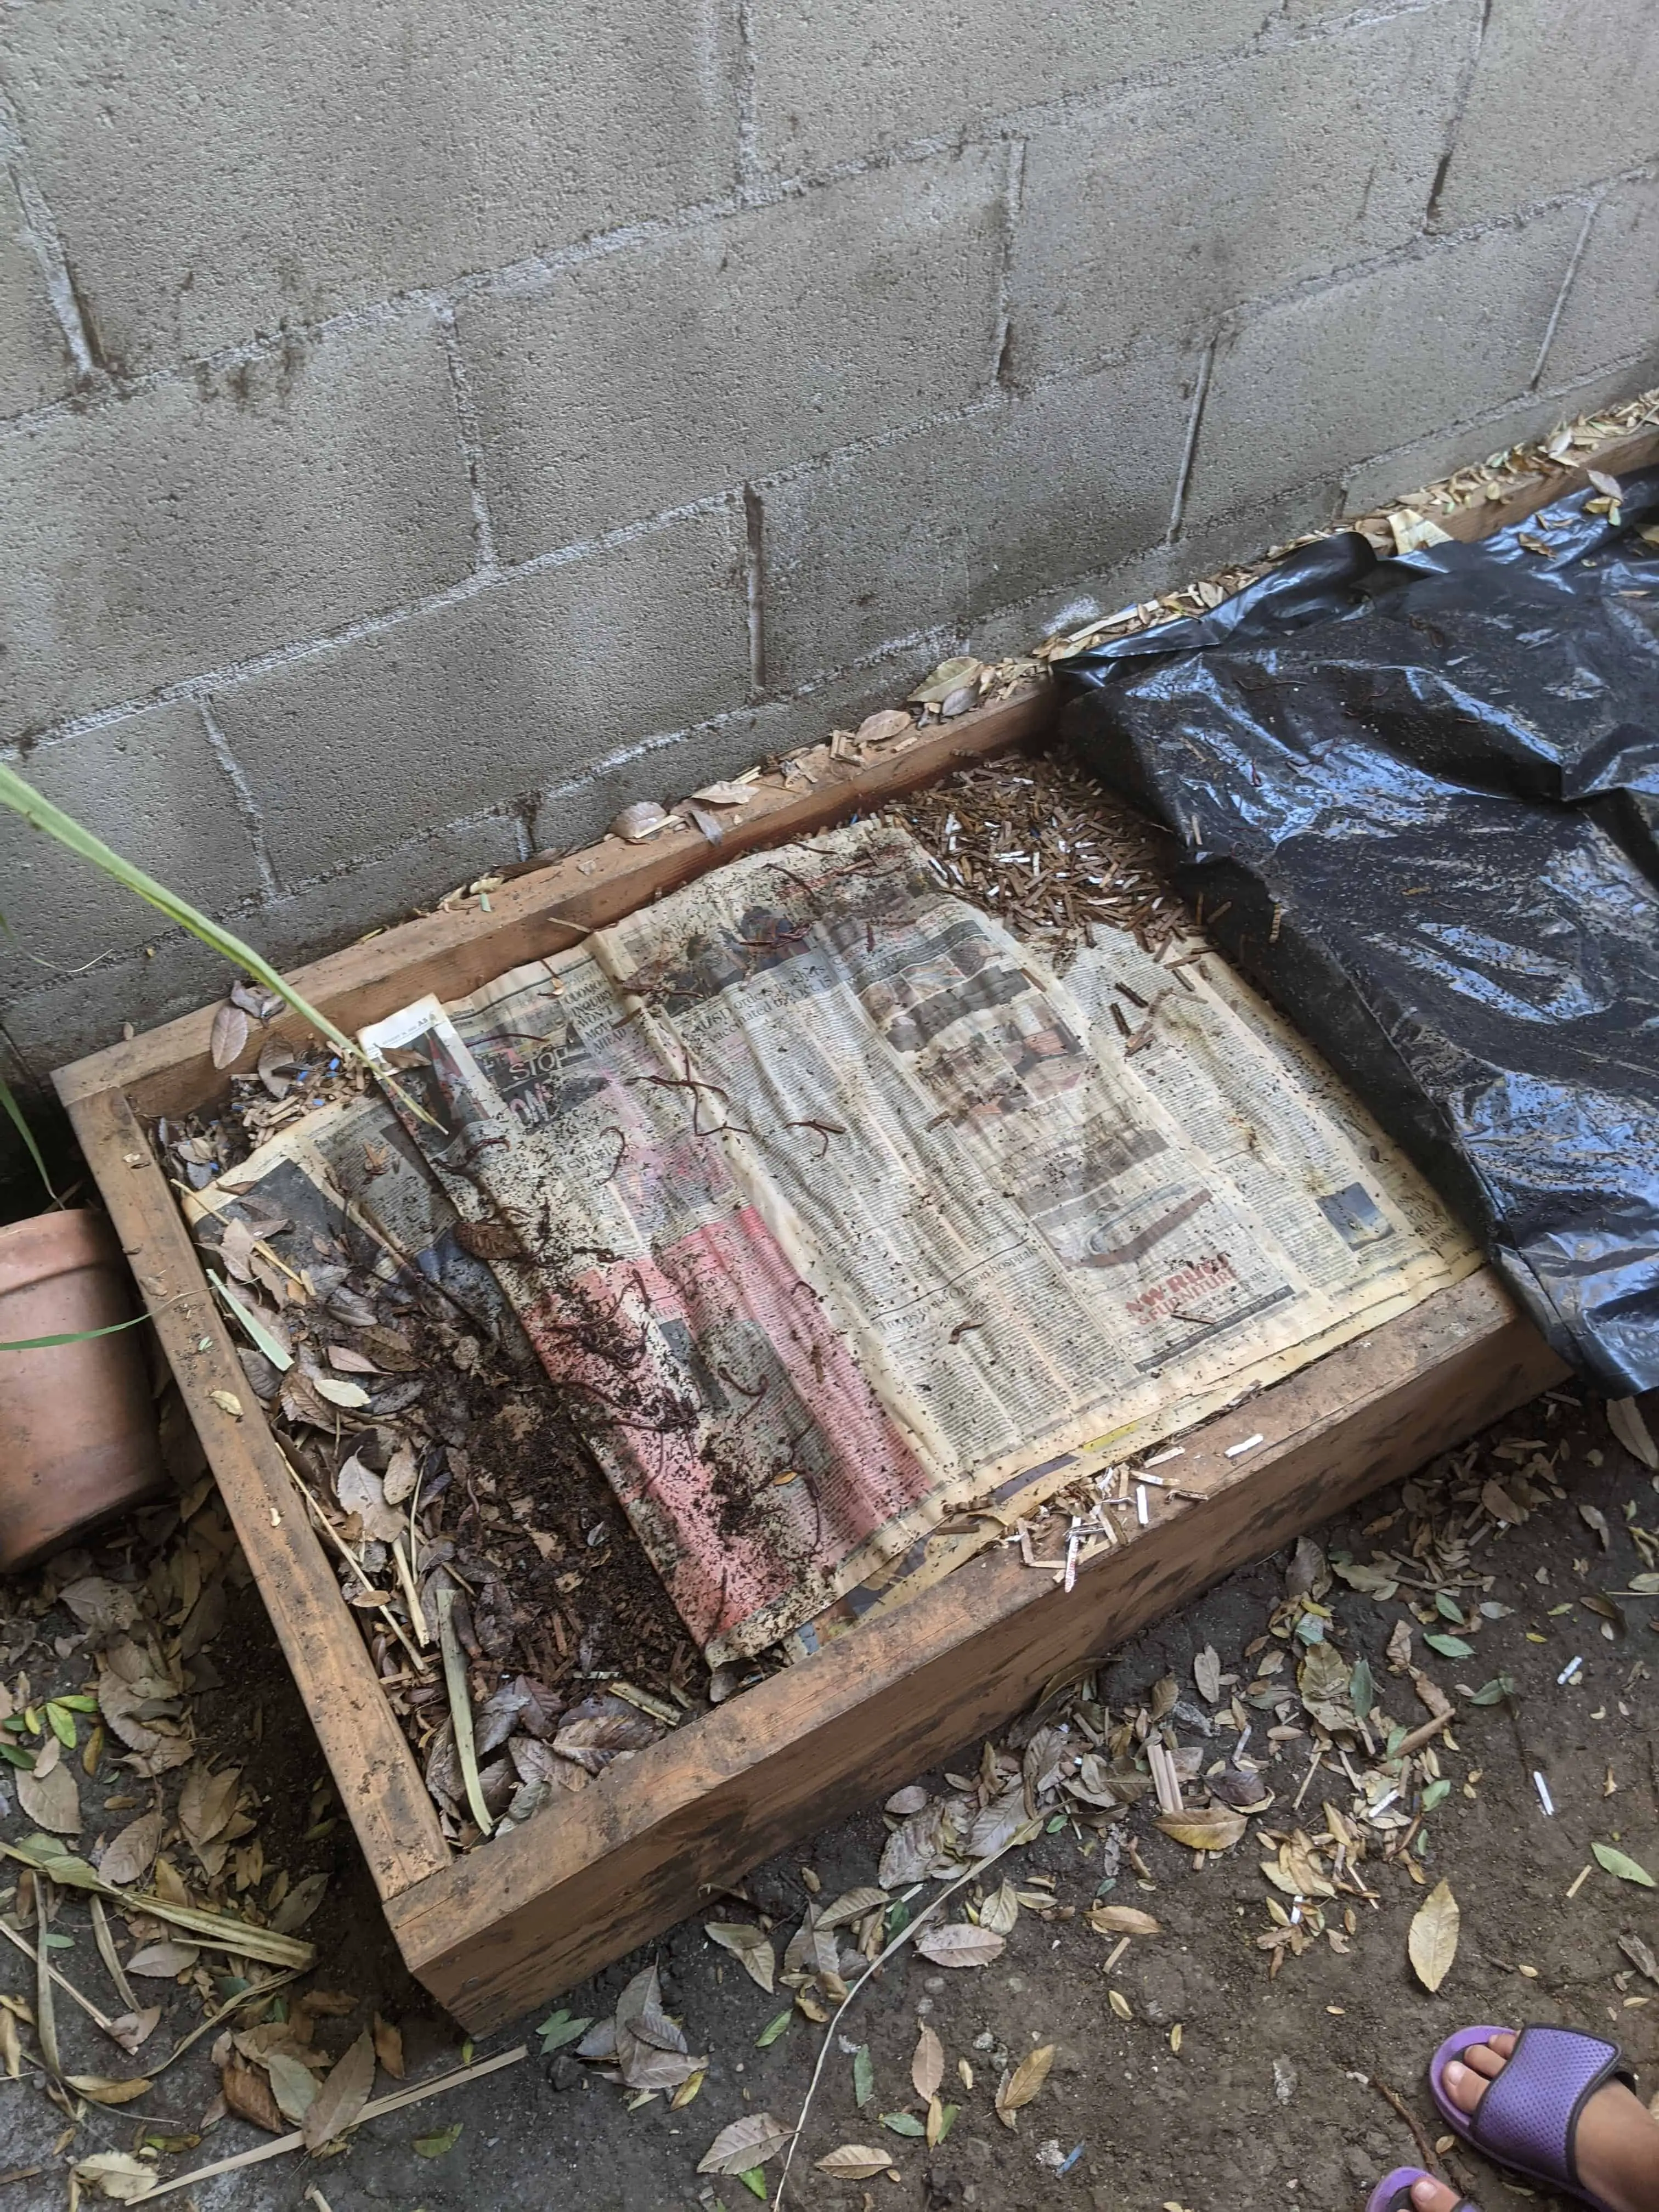 A worm bedding with newspapers and fallen leaves in a raised garden bed.